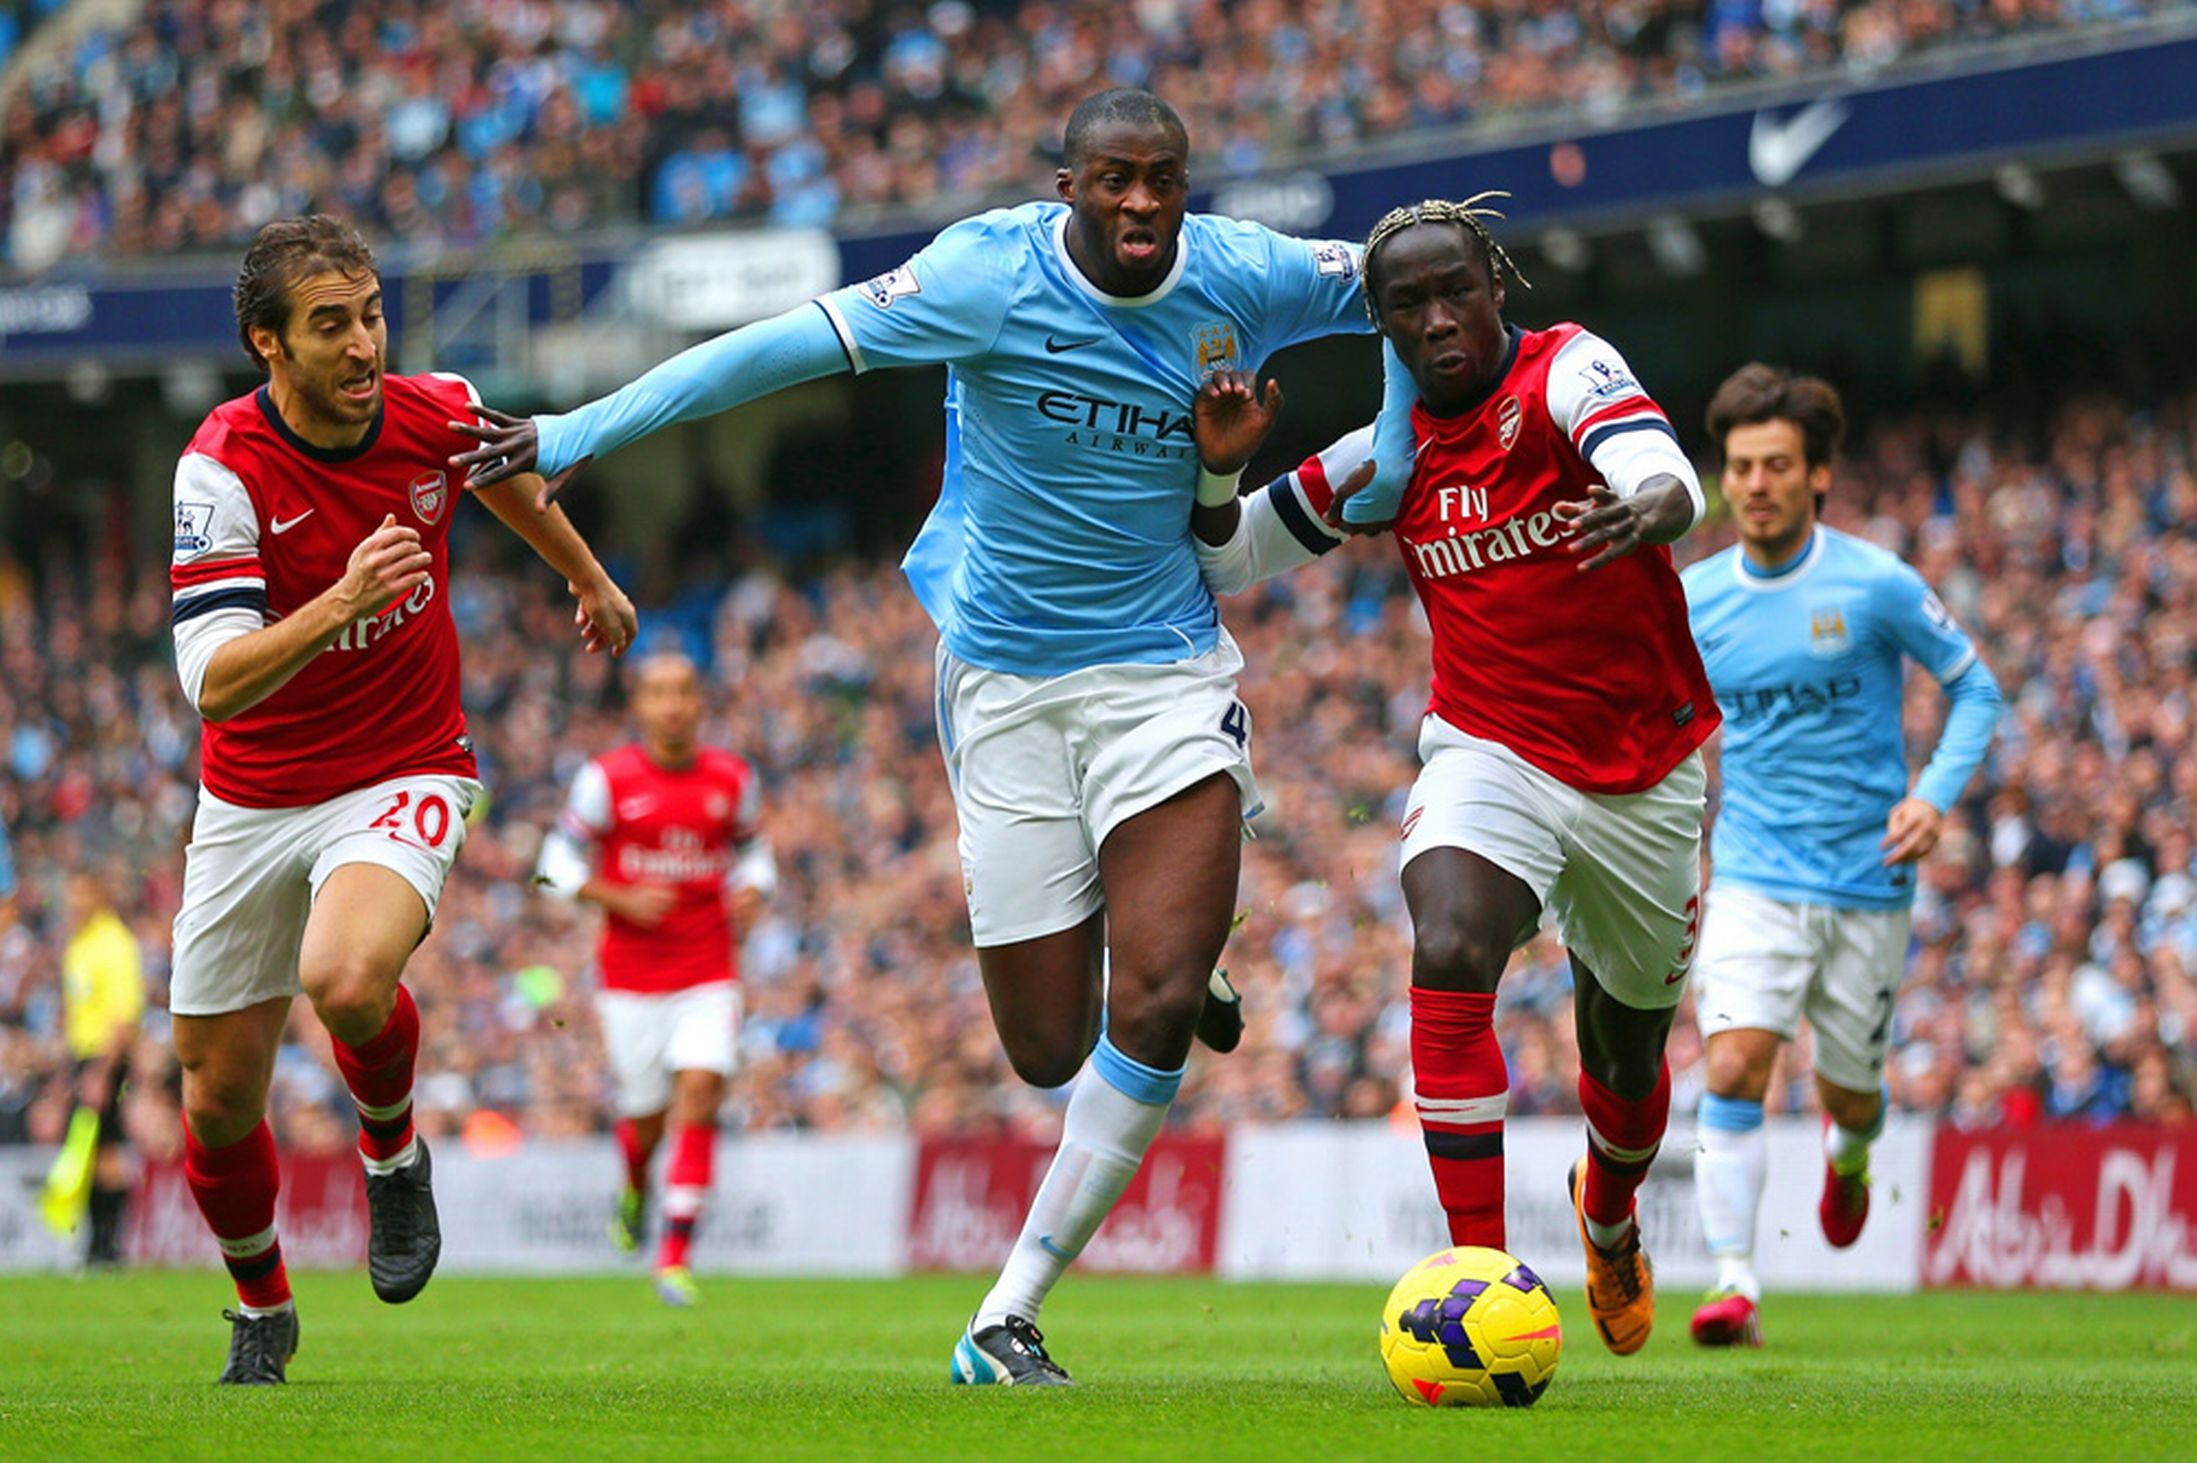 Arsenal Leaves It Late Over Manchester City To Reach FA Cup Final